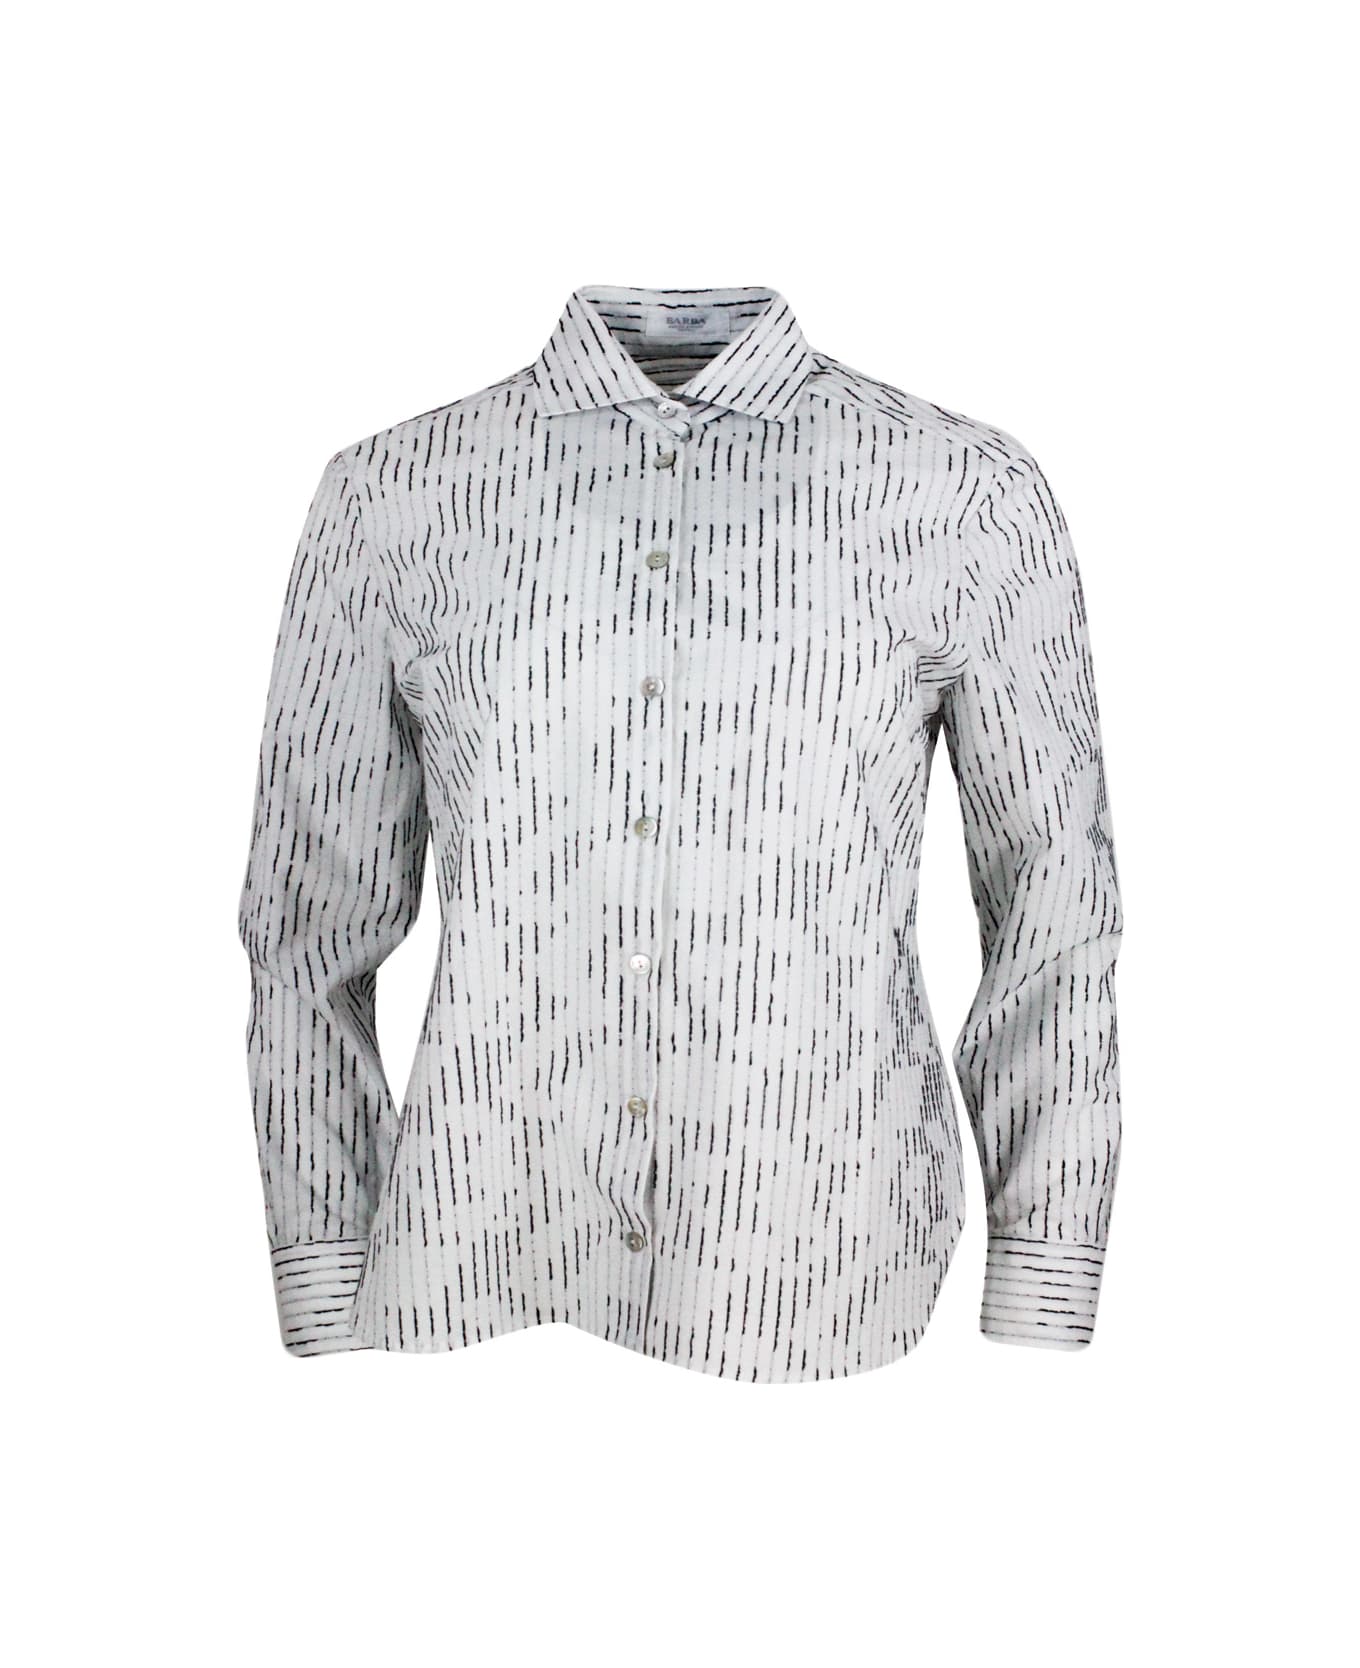 Barba Napoli Long-sleeved Shirt In 100% Soft And Fine Cotton With Raised Vertical Threads. Regular Line - White